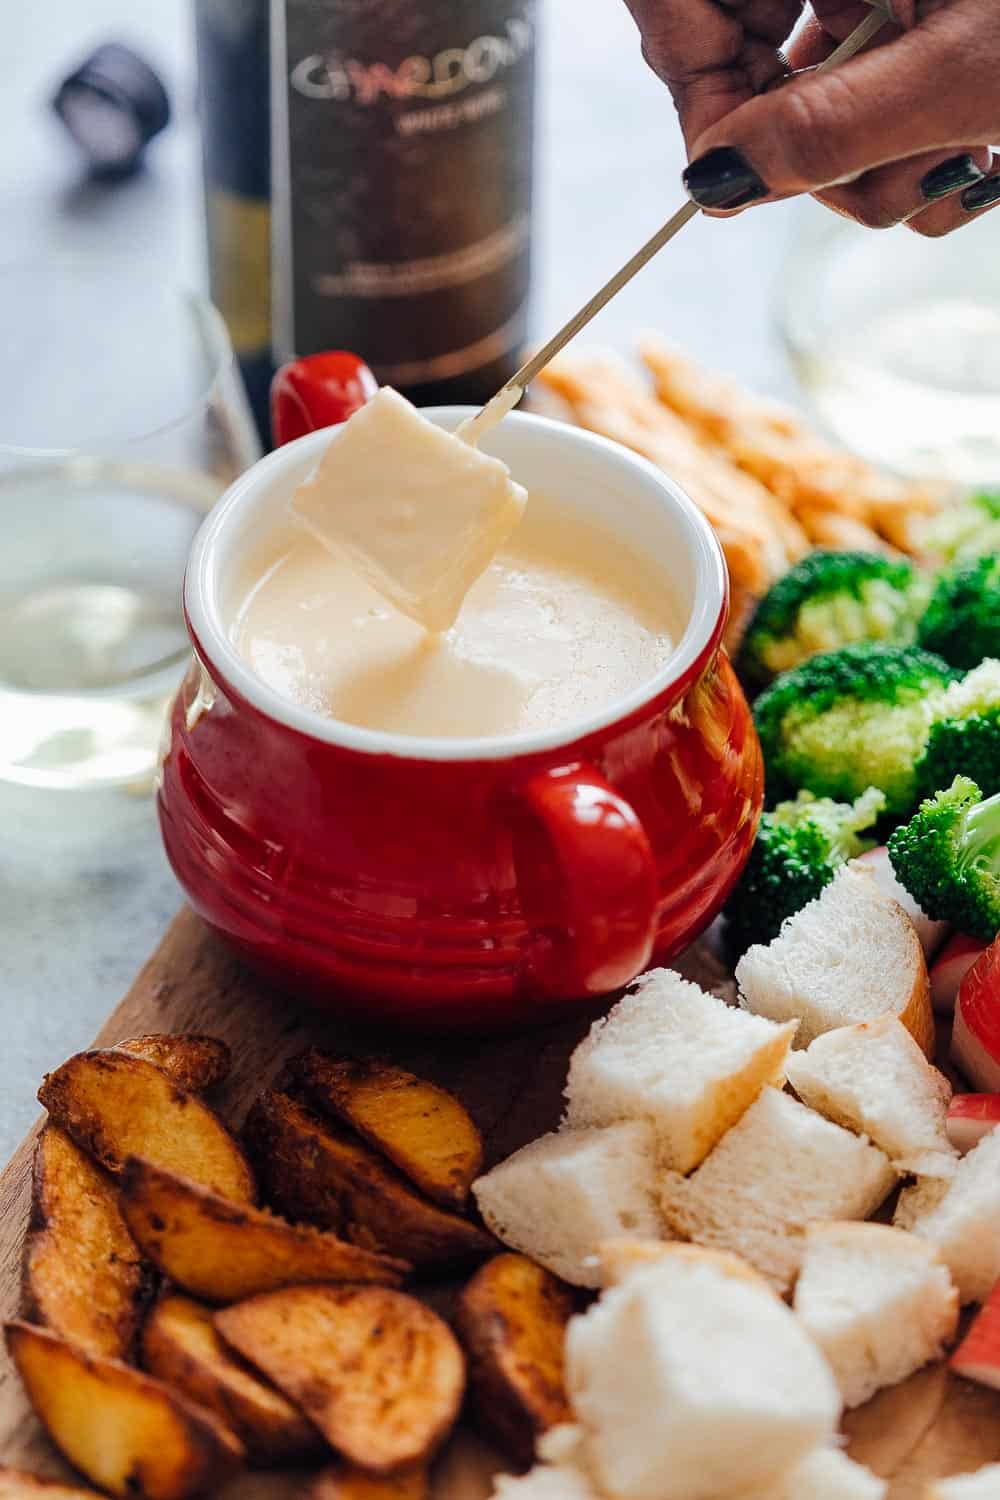 Dipping bread into Easy cheese fondue recipe with white wine